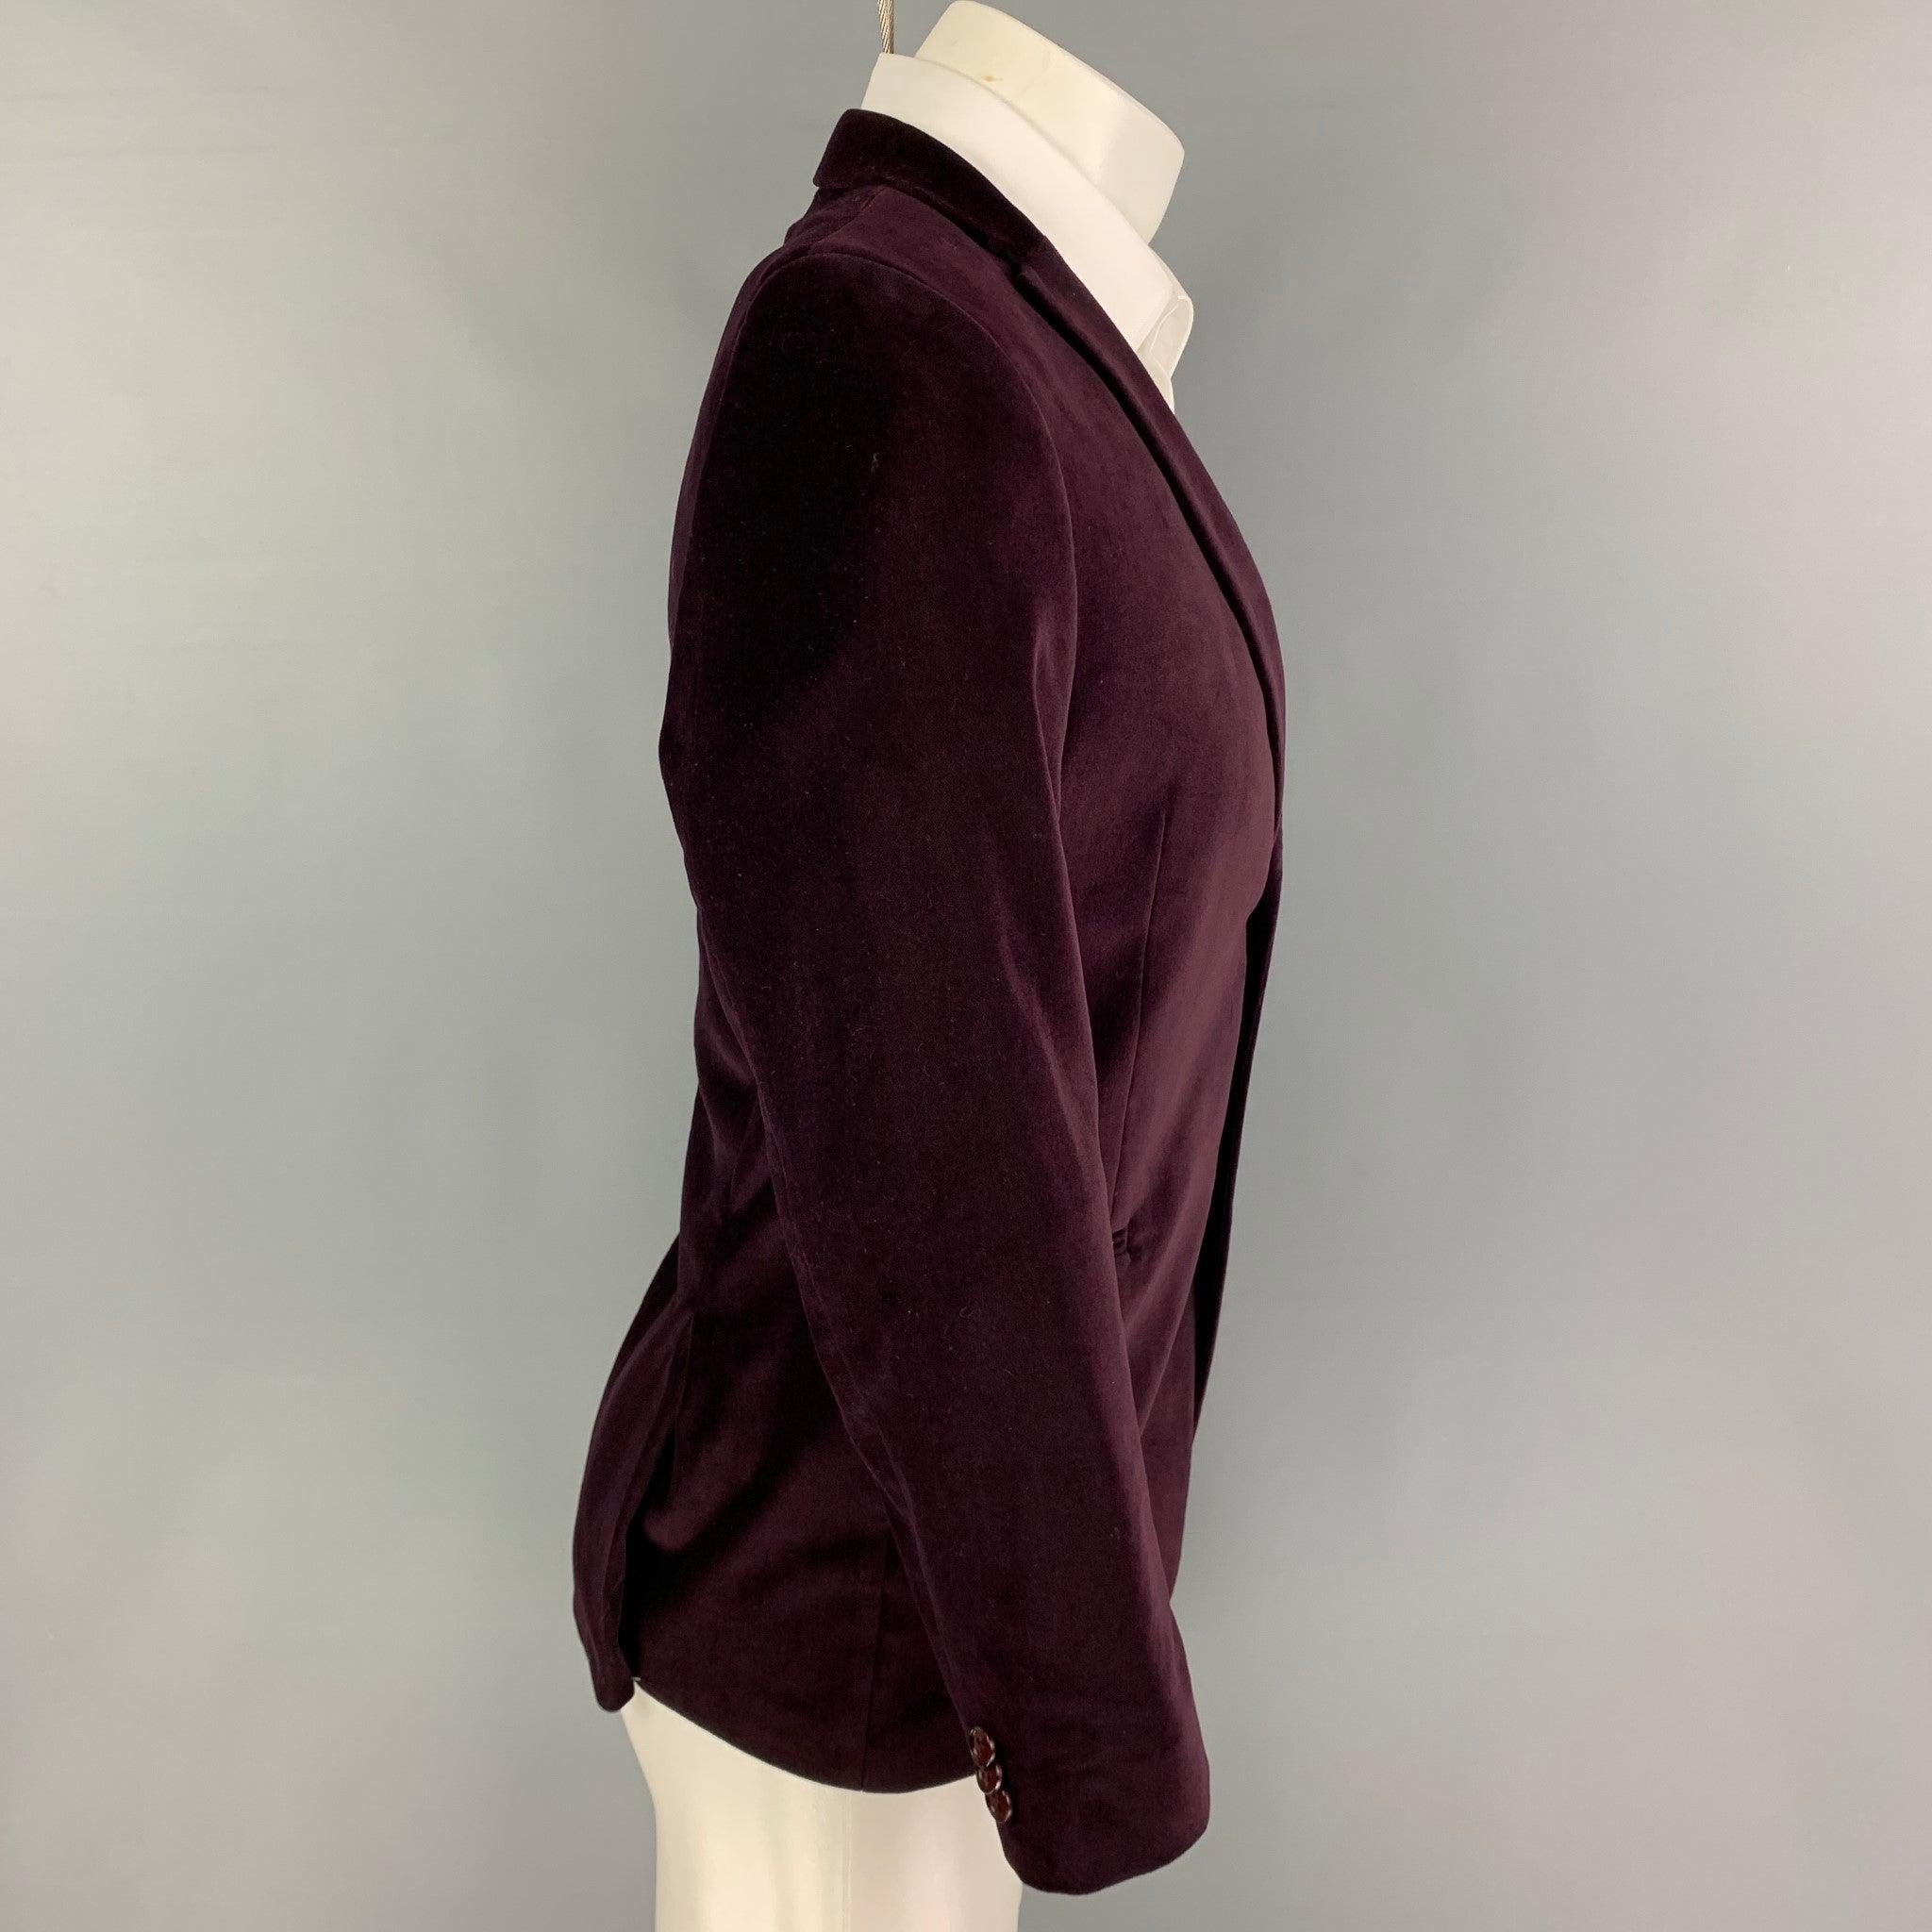 MICHAEL KORS sport coat comes in a purple velvet cotton with a full liner featuring a notch lapel, slit pockets, double back vent, and a double button closure.
Excellent
Pre-Owned Condition. 

Marked:   Size tag removed.  

Measurements: 
